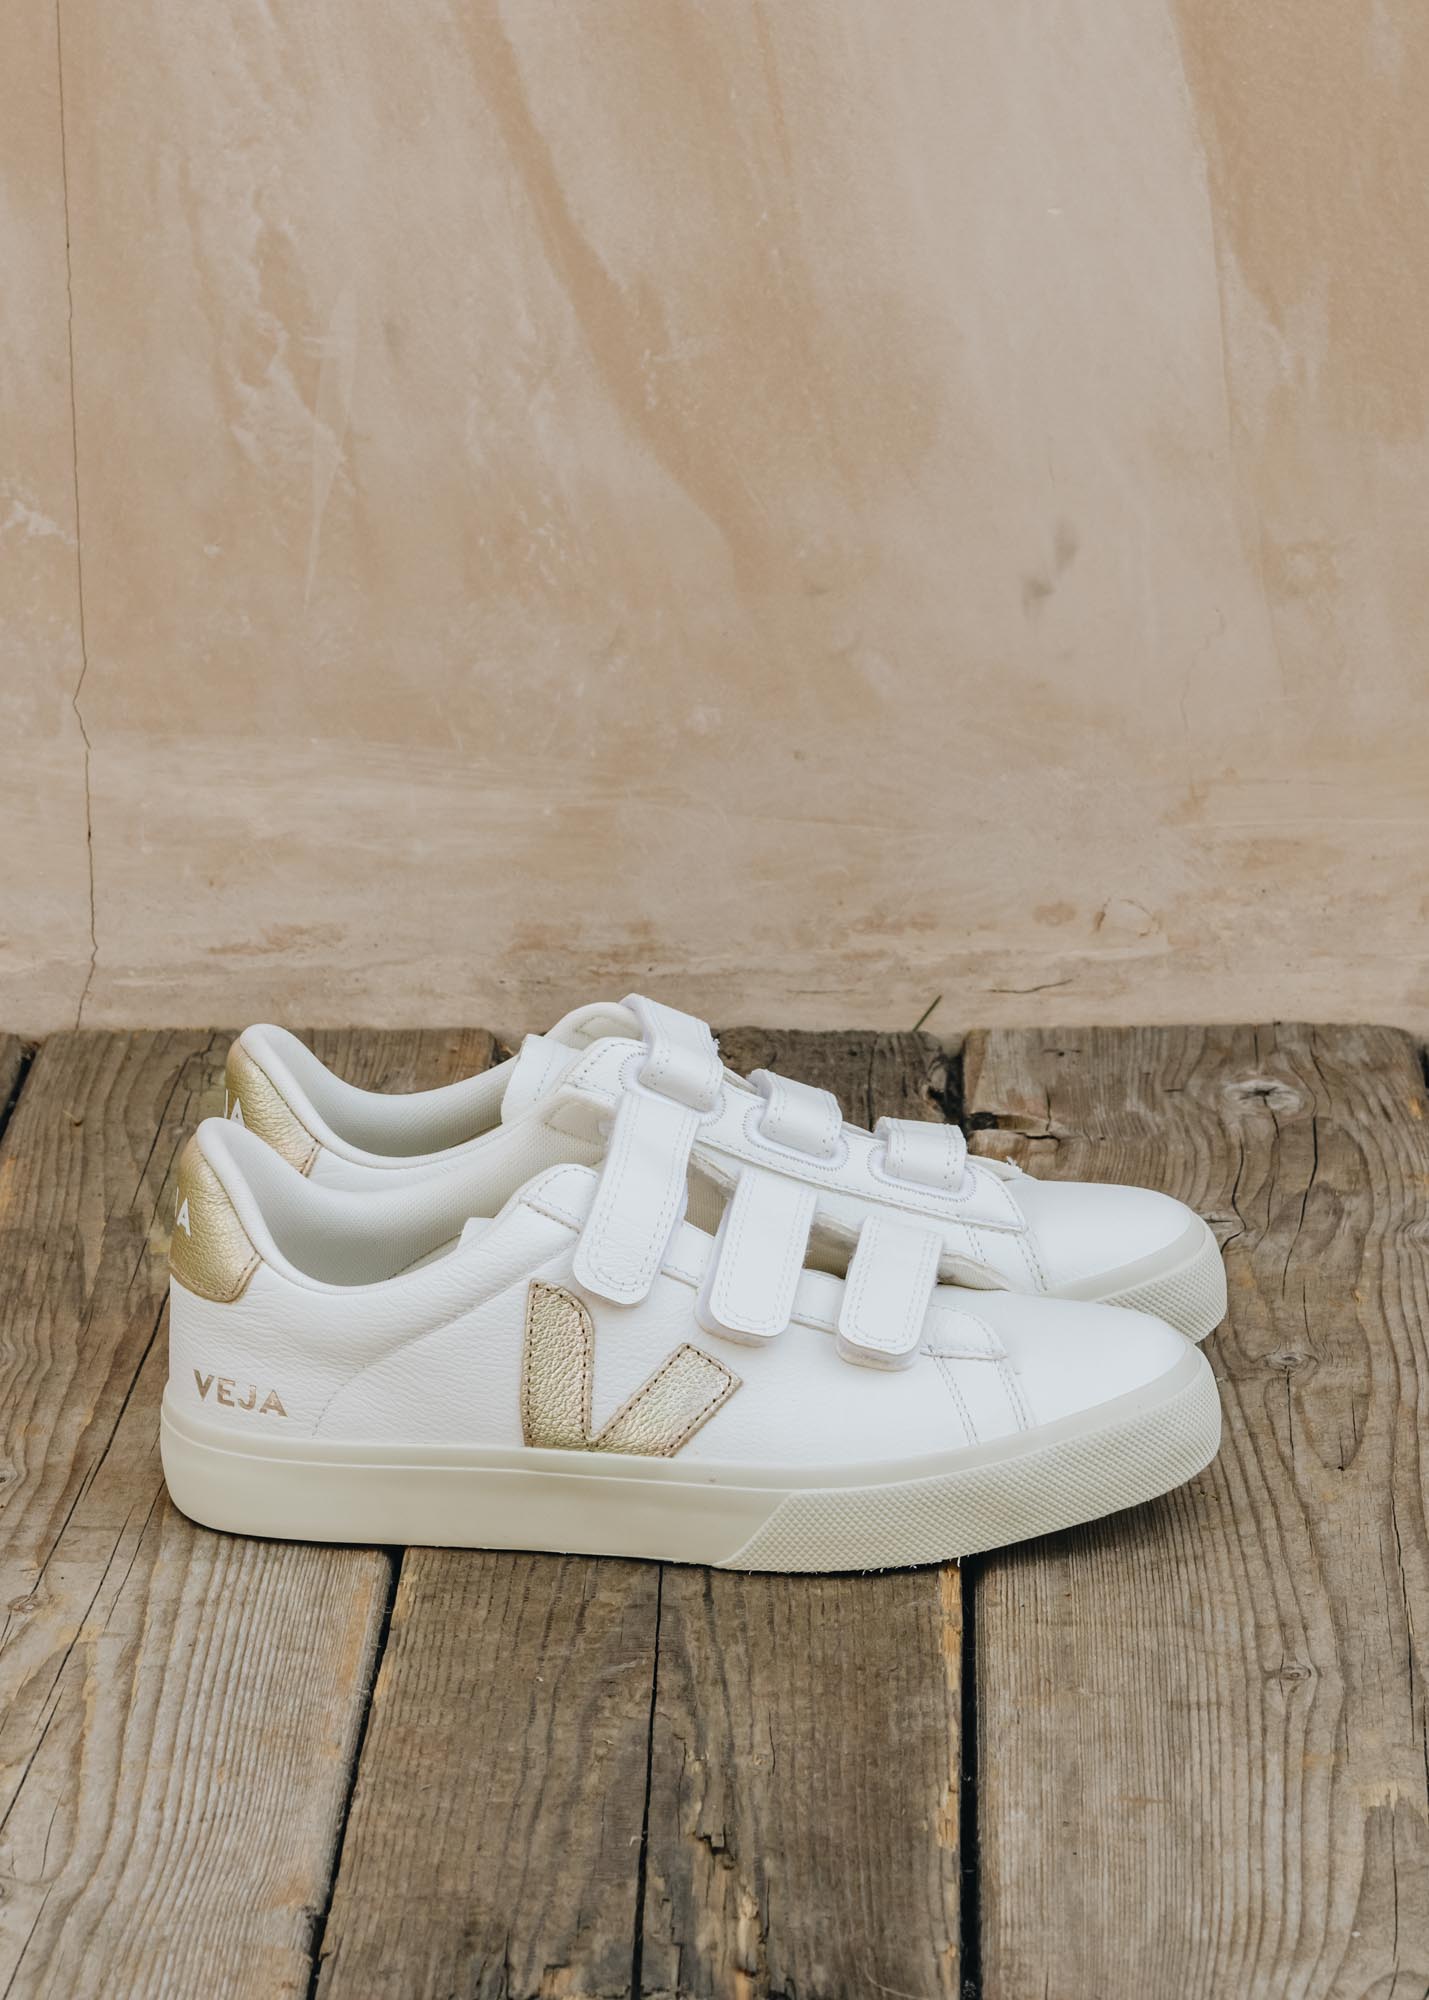 Veja Women's Recife Leather Trainers in Extra White and Platine